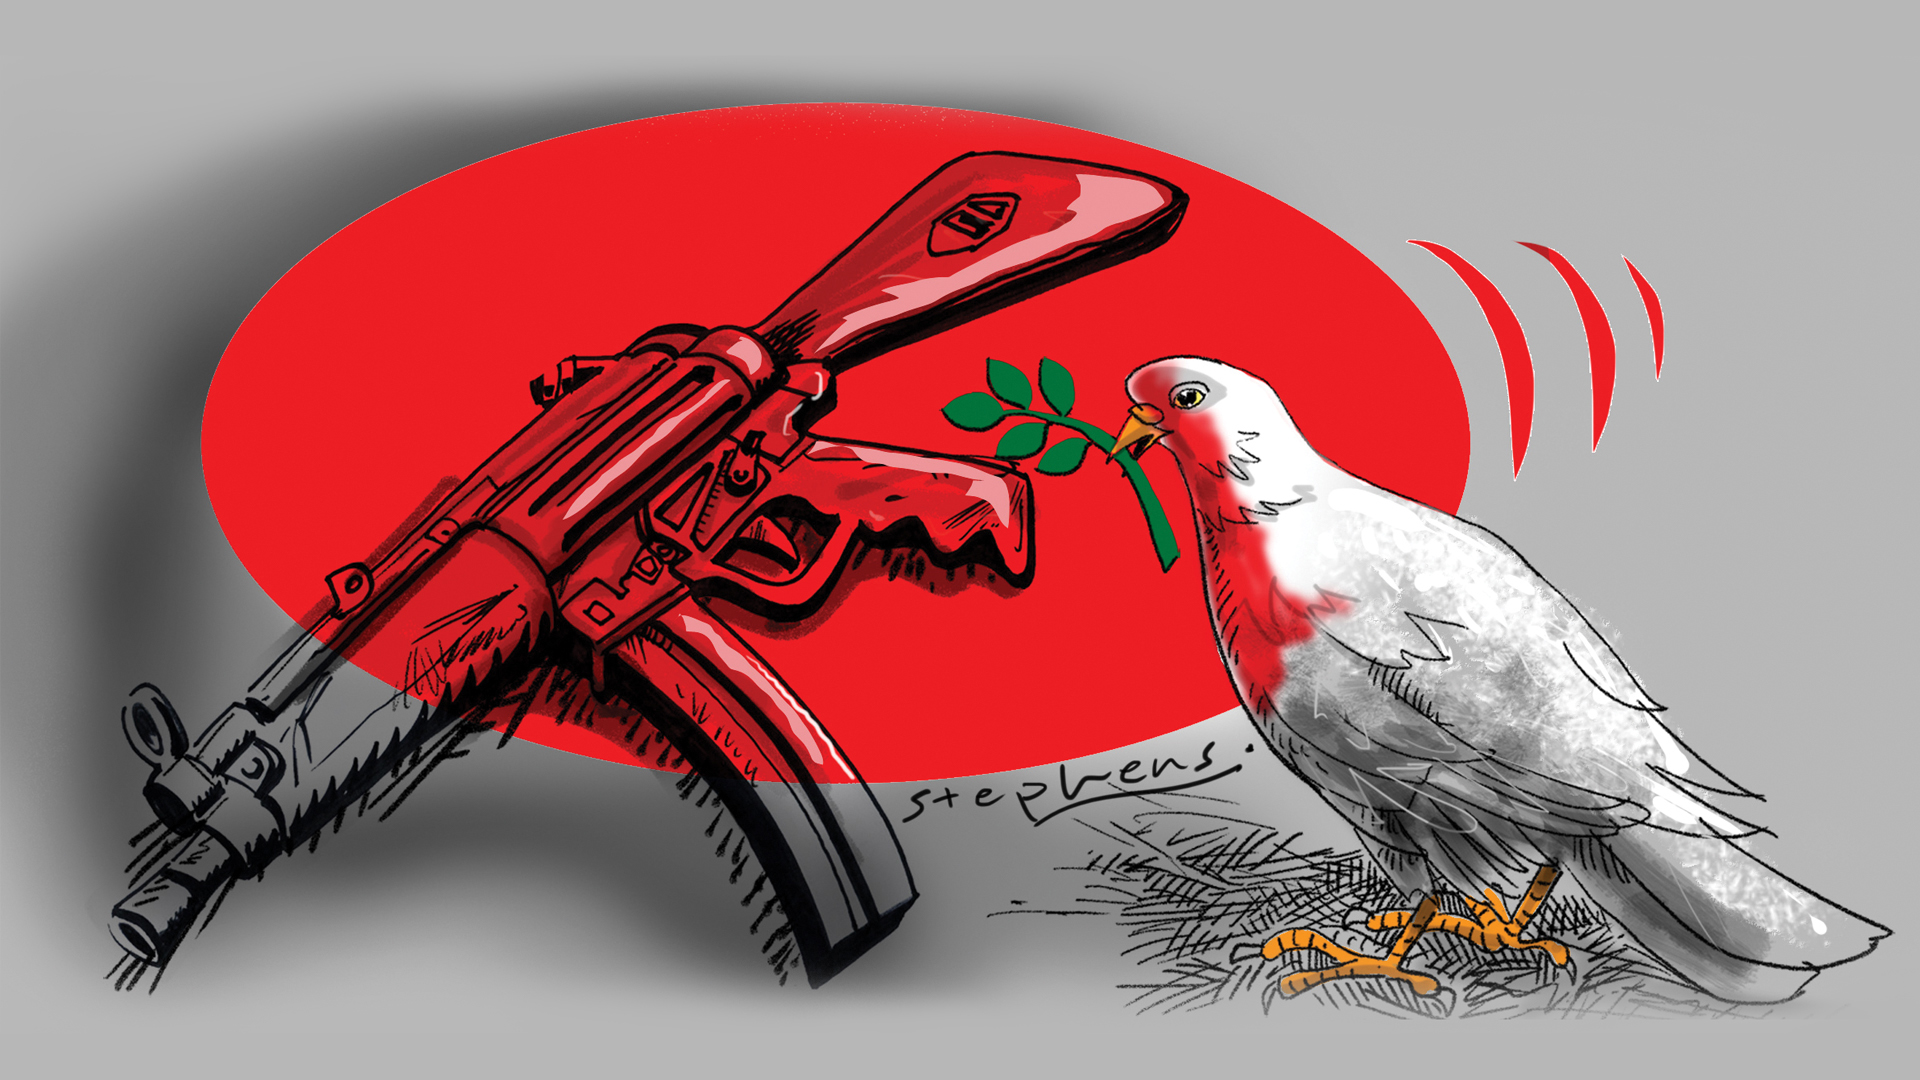 Japan's actions are limited by international law and the coalition of states participating in collective self-defence